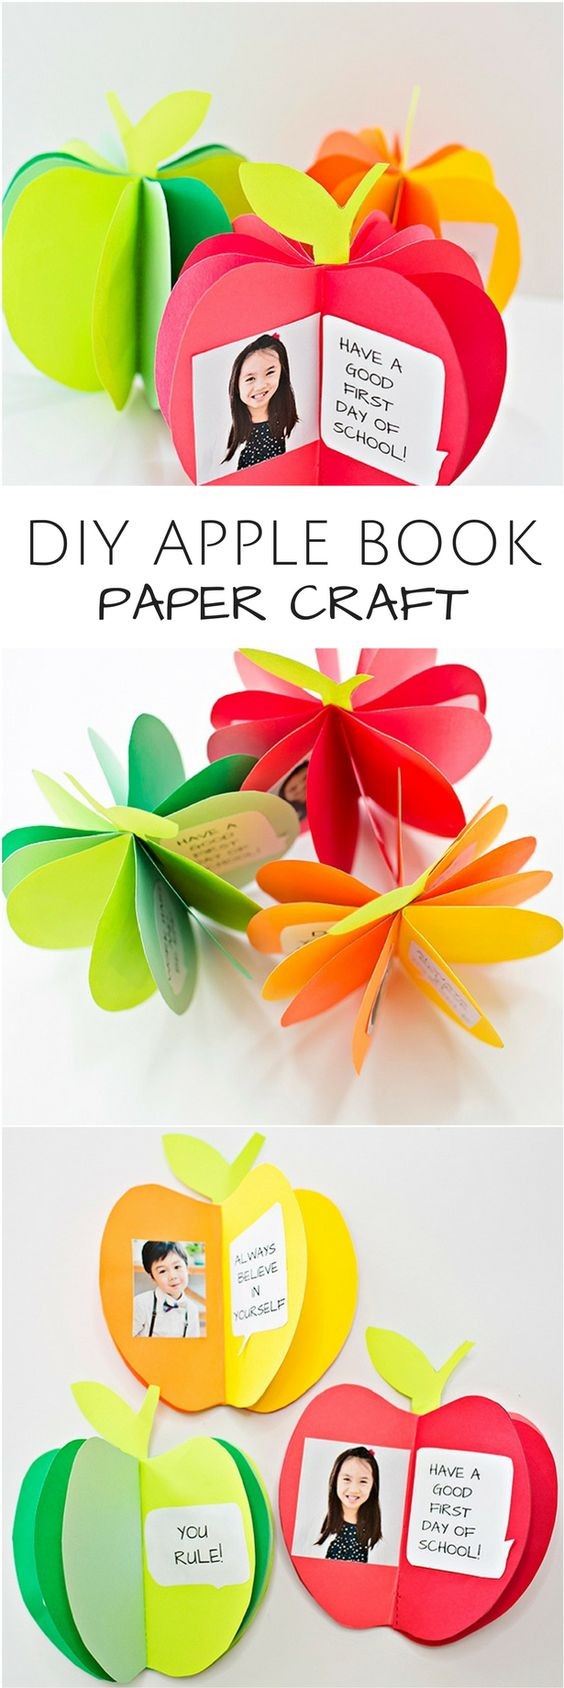 Papercraft Kids Diy 3d Apple Book Paper Craft Cute Back to School Craft for Kids or